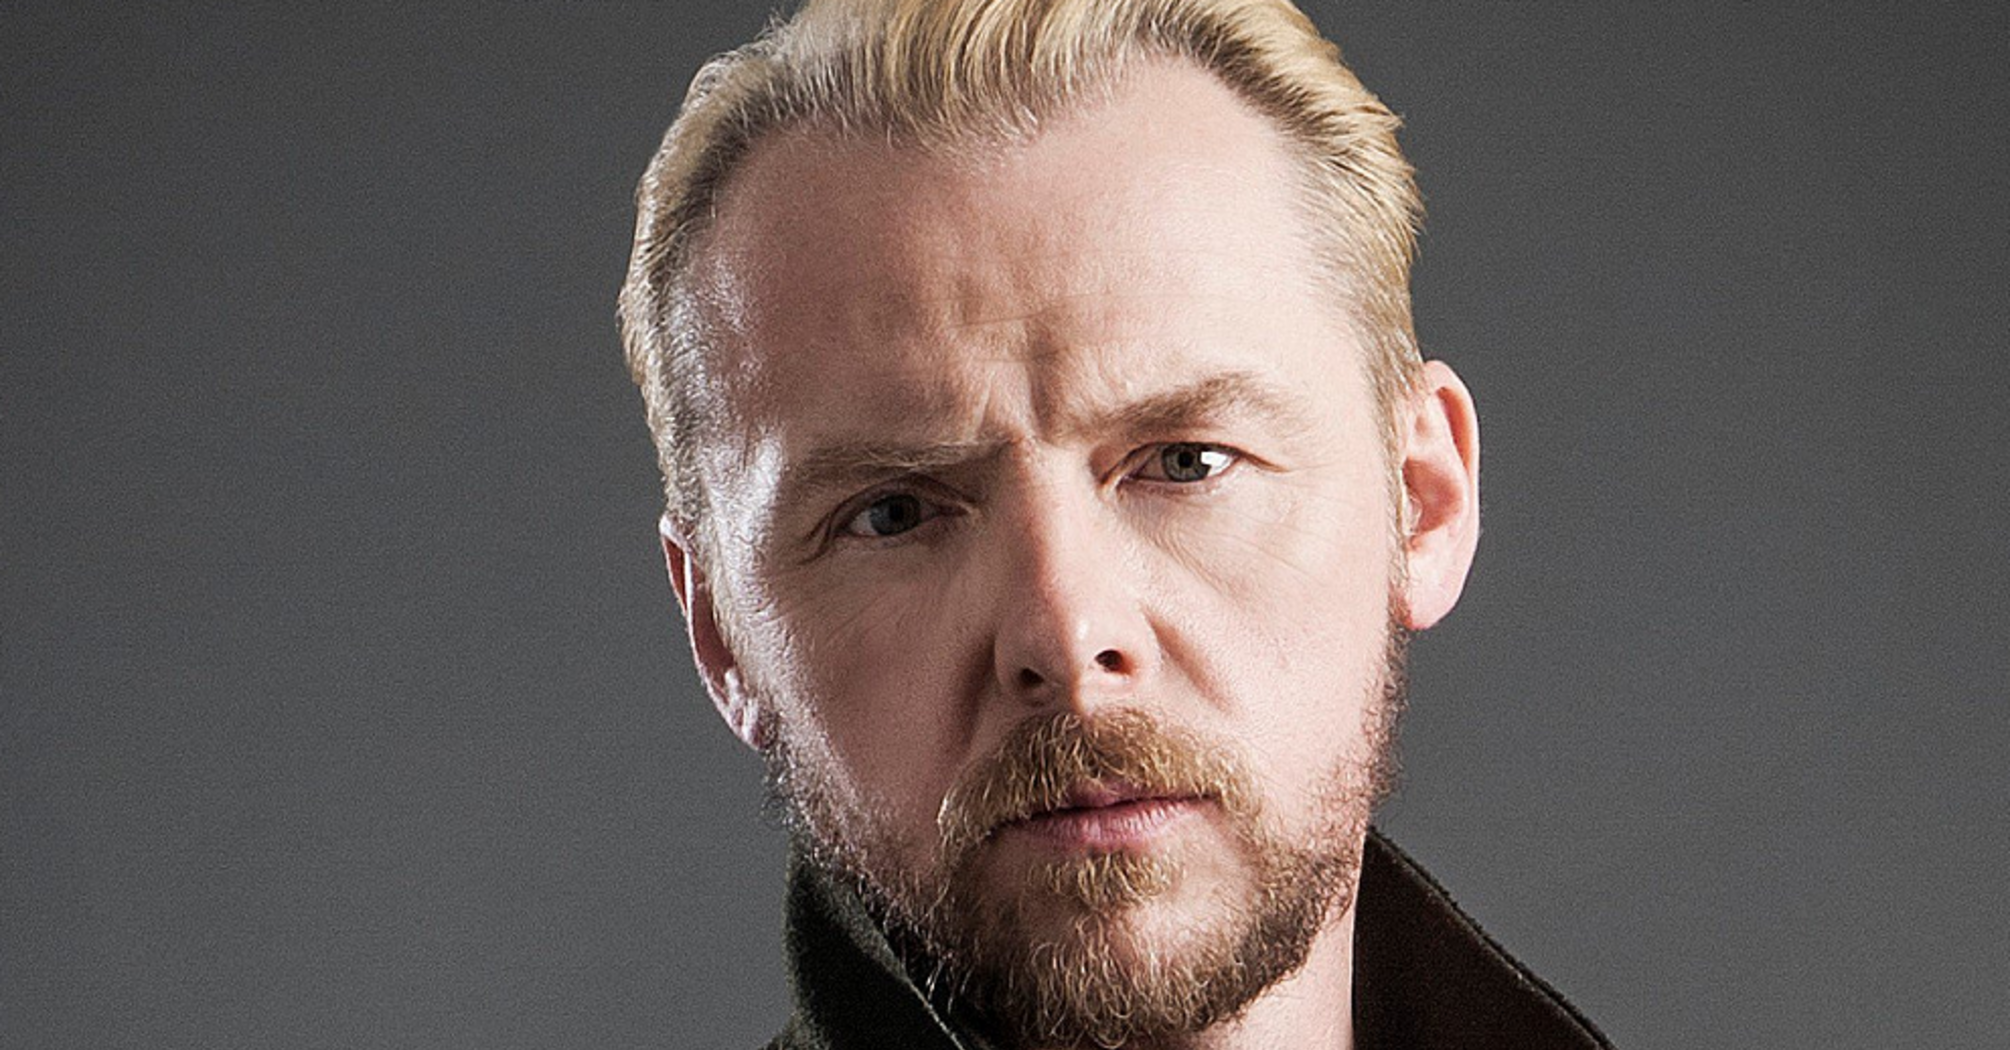 5 interesting facts about Simon Pegg